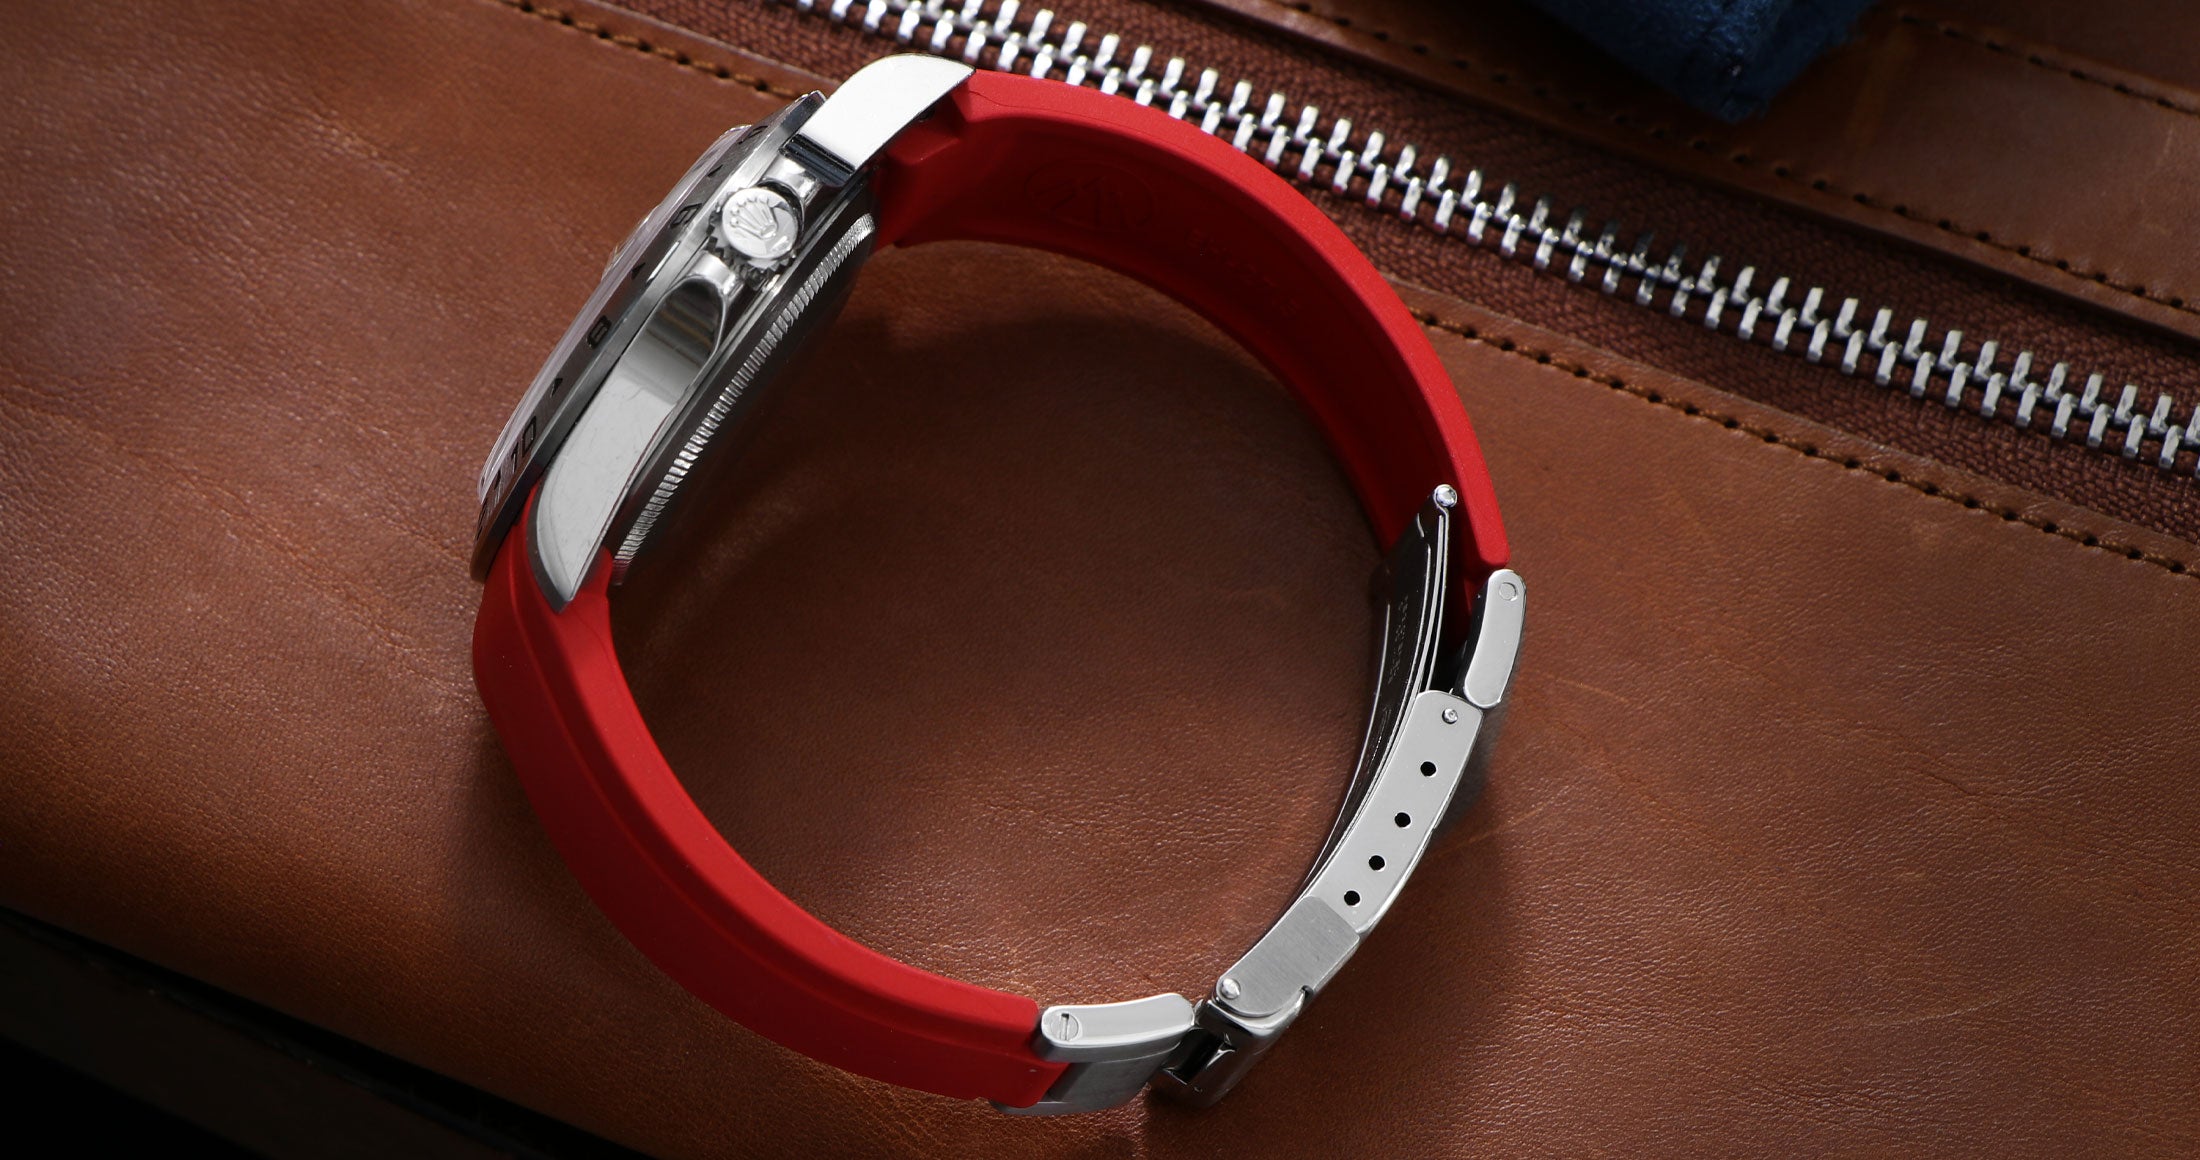 Red rubber deployant watch band for Explorer II